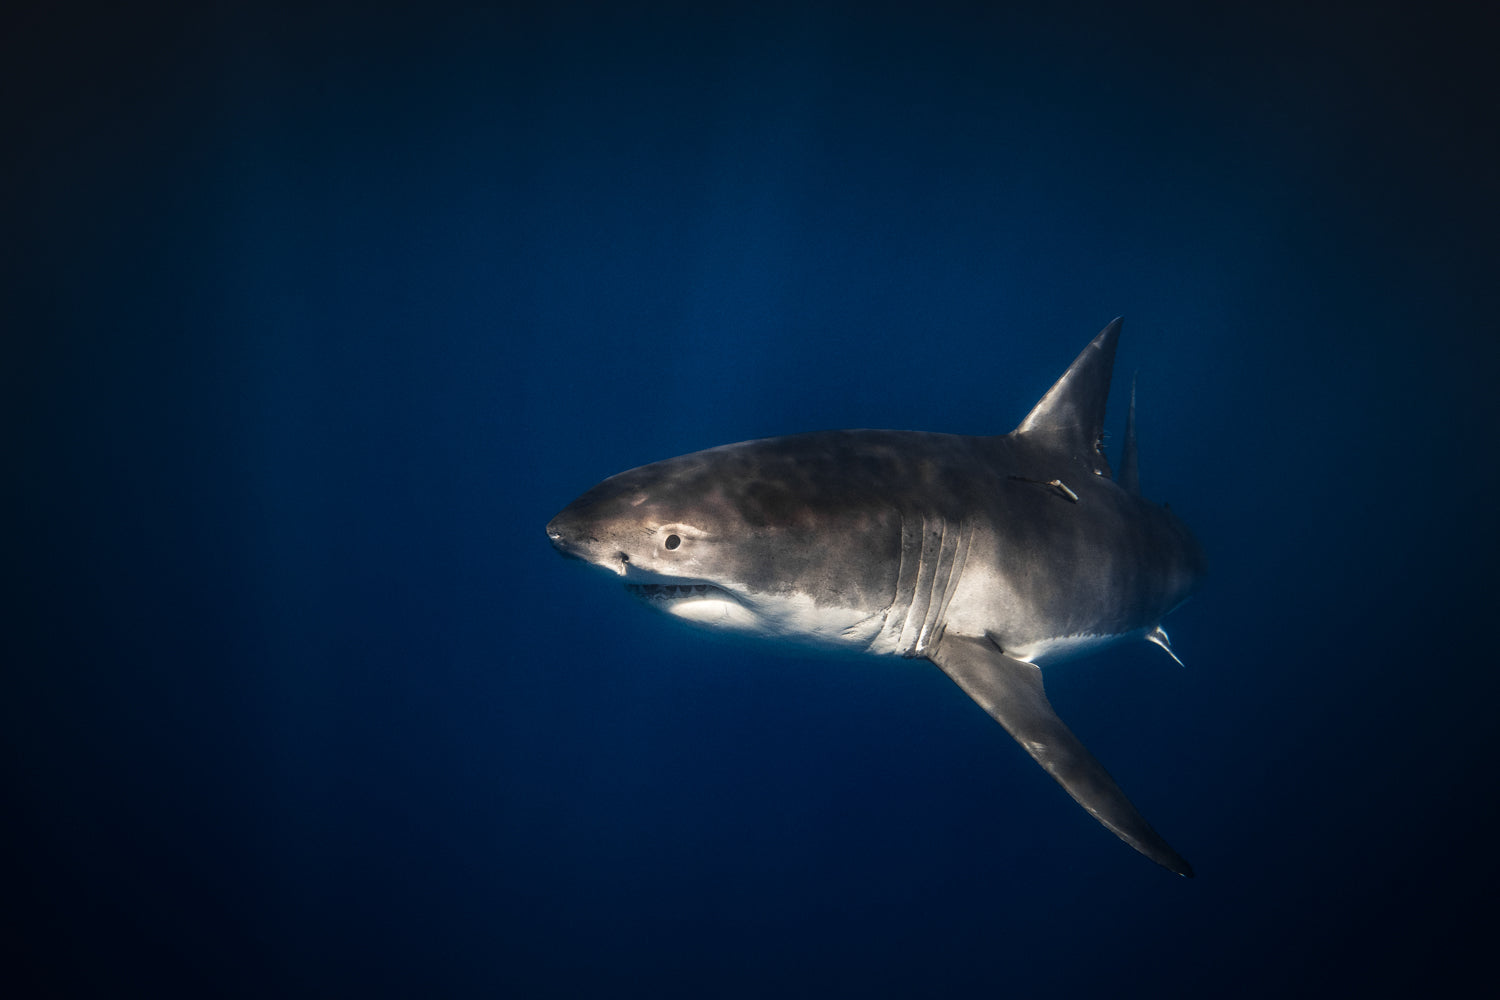 An attentive Great White Shark